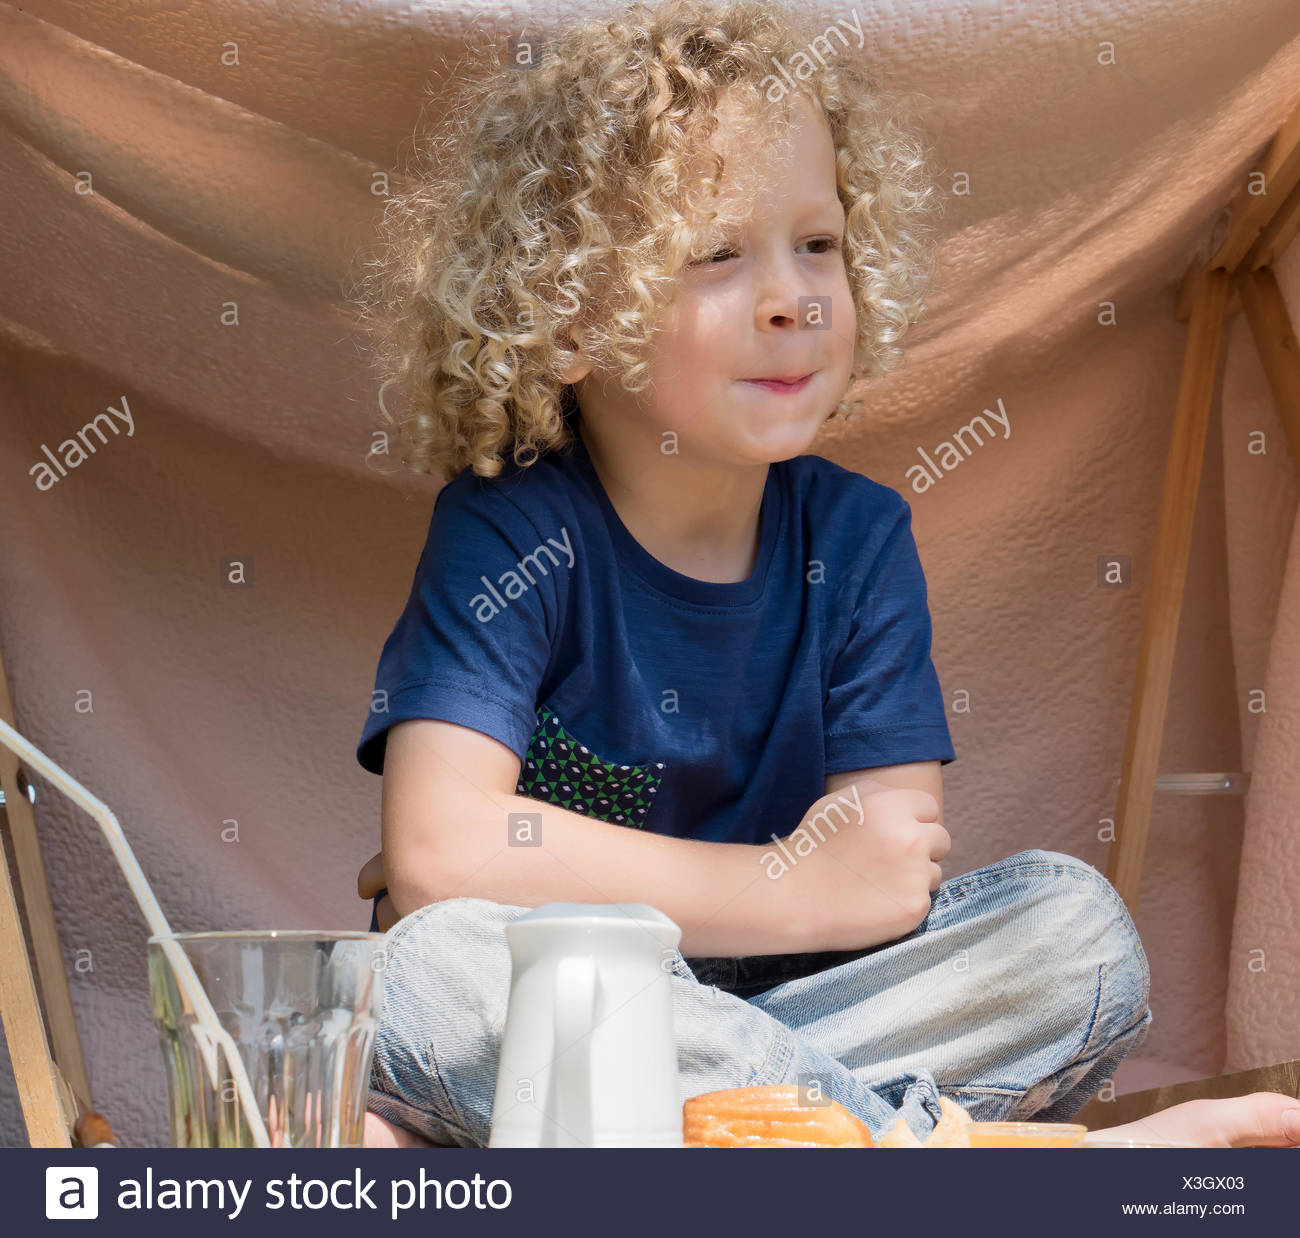 Little Boy With Curly Blond Hair Outside Stock Photo 277581475